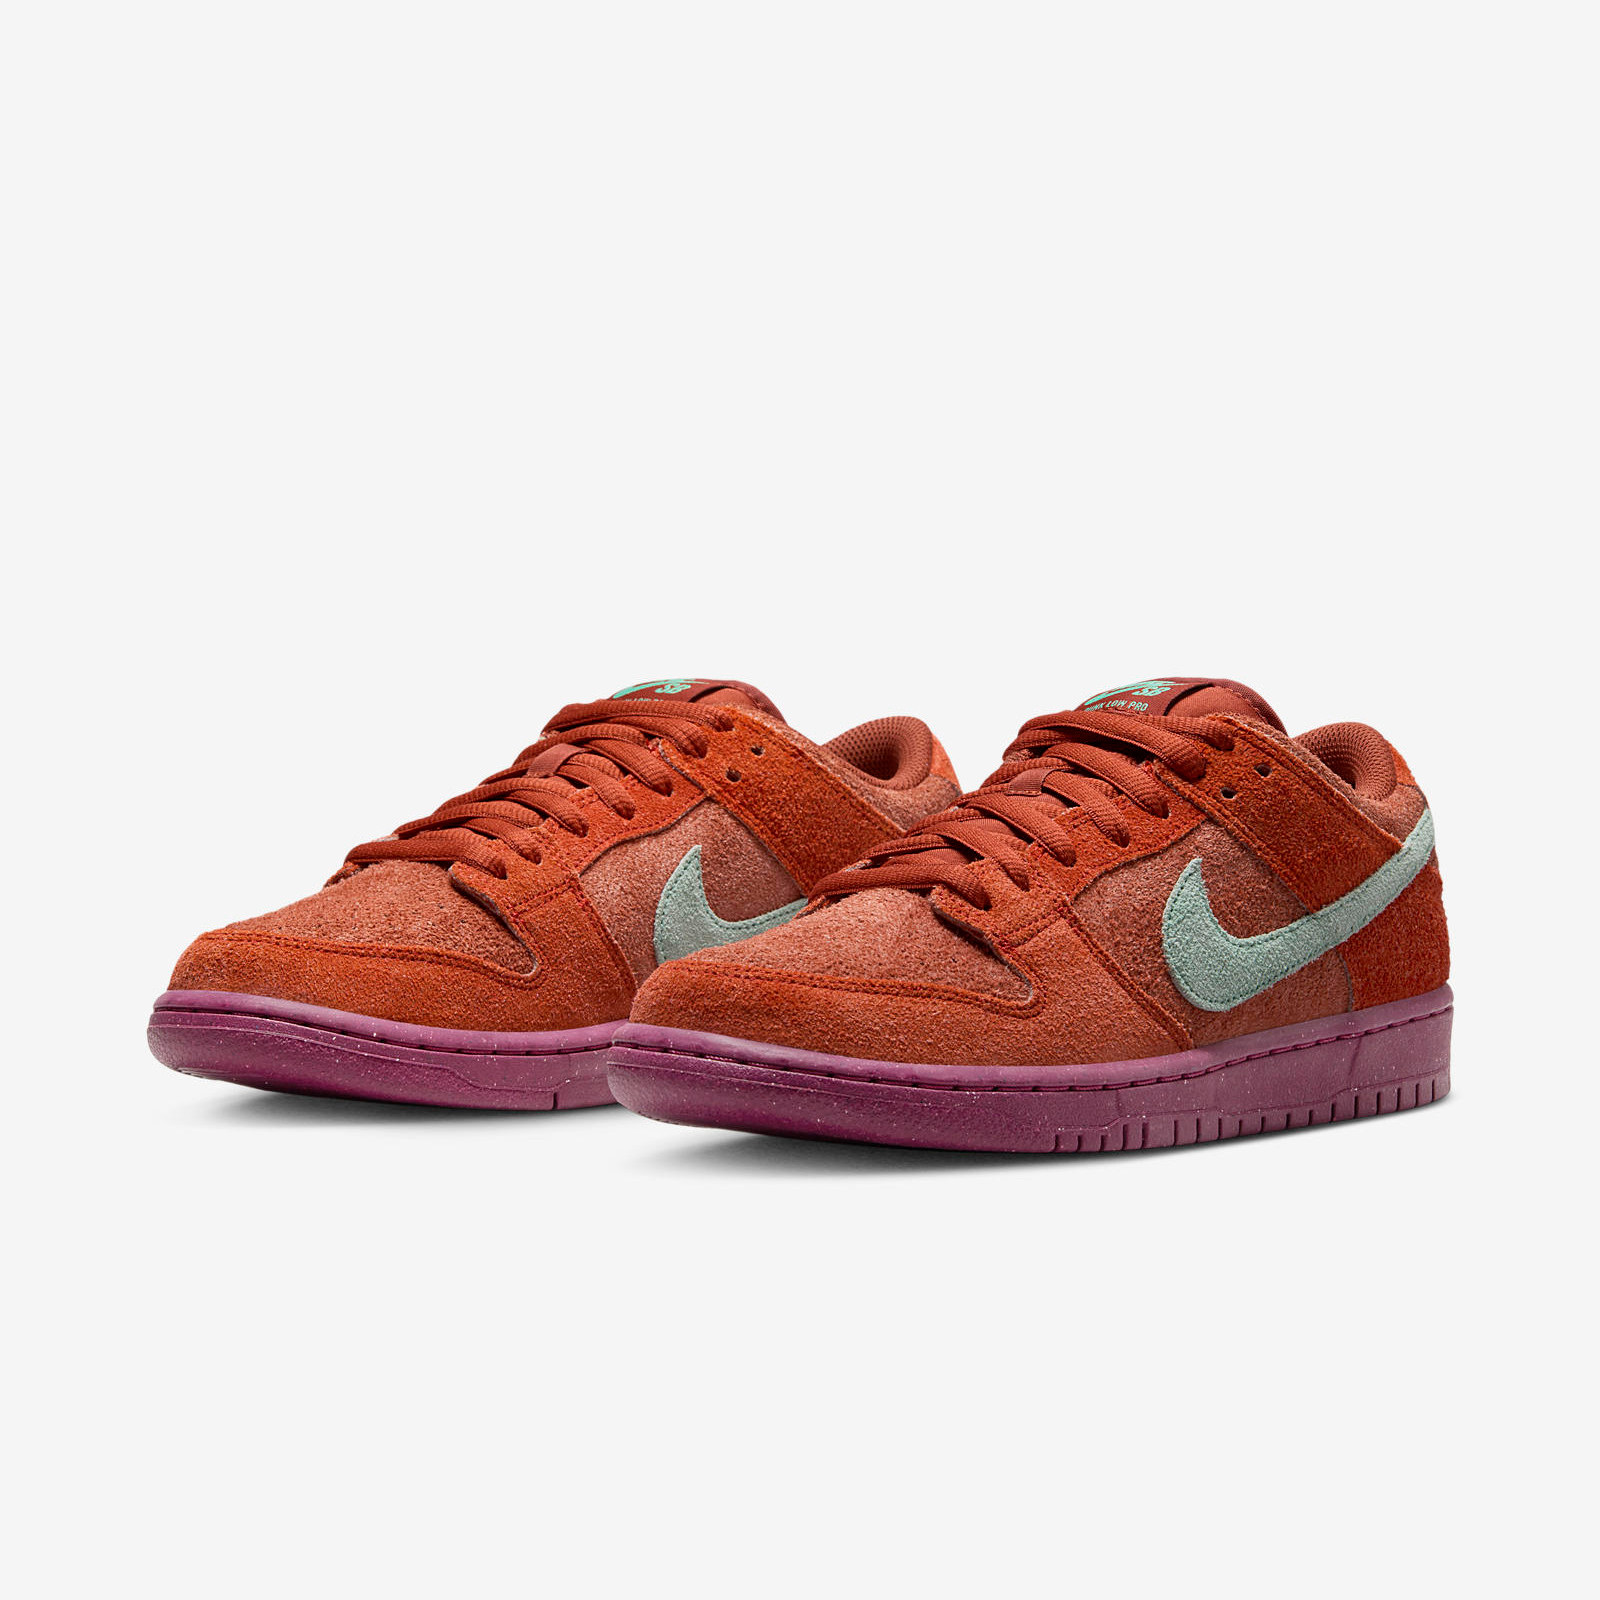 Nike SB Dunk Low Pro
Mystic Red / Rosewood